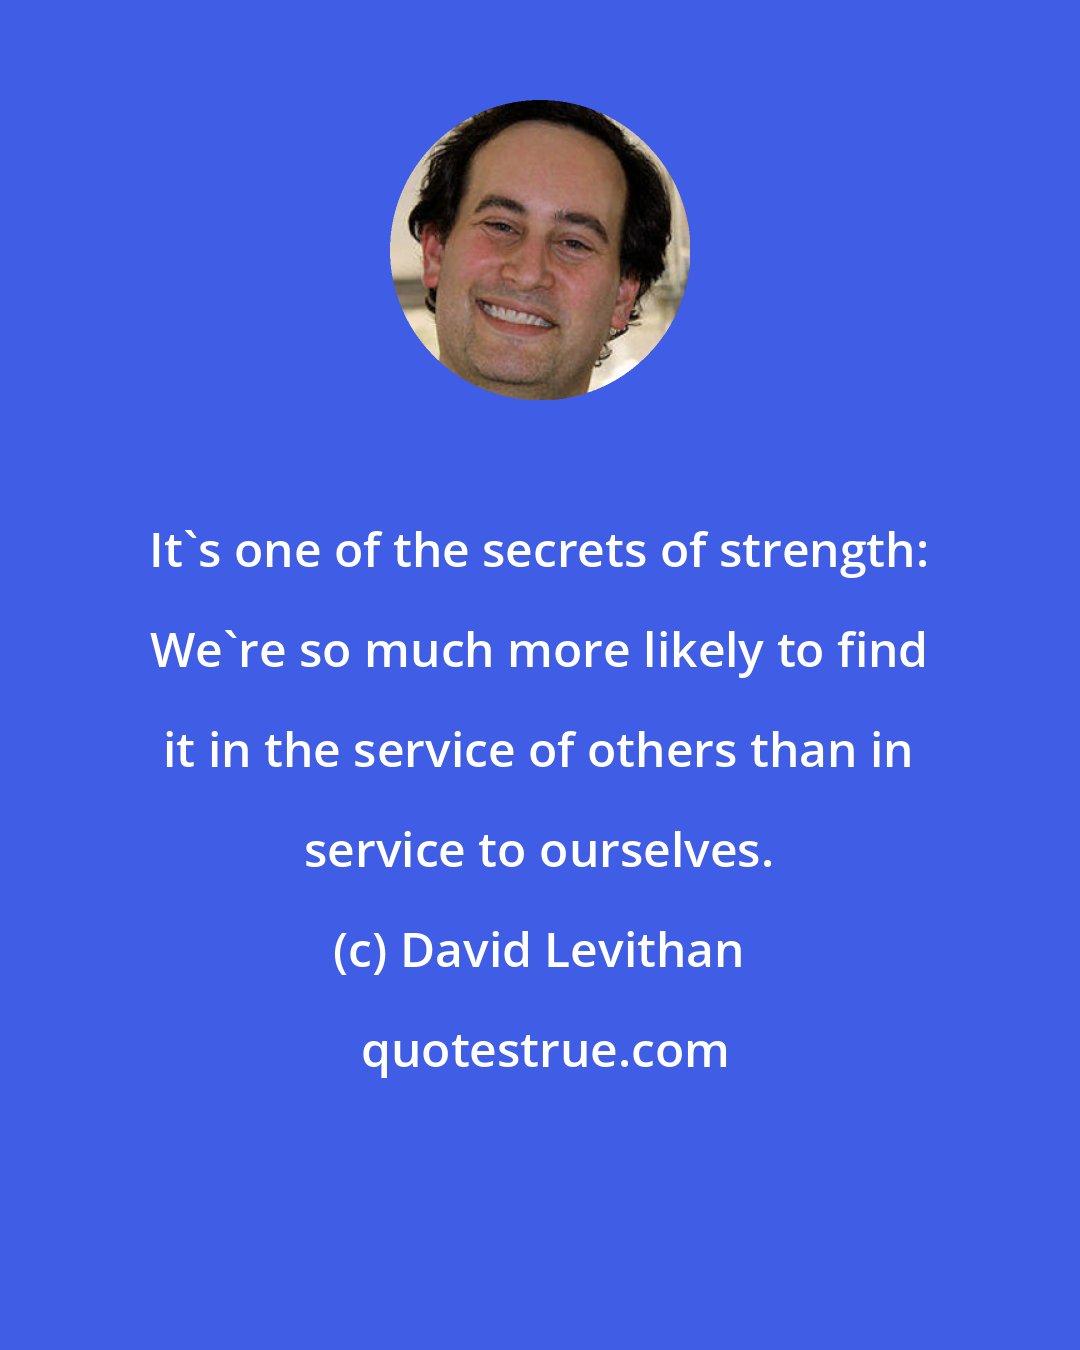 David Levithan: It's one of the secrets of strength: We're so much more likely to find it in the service of others than in service to ourselves.